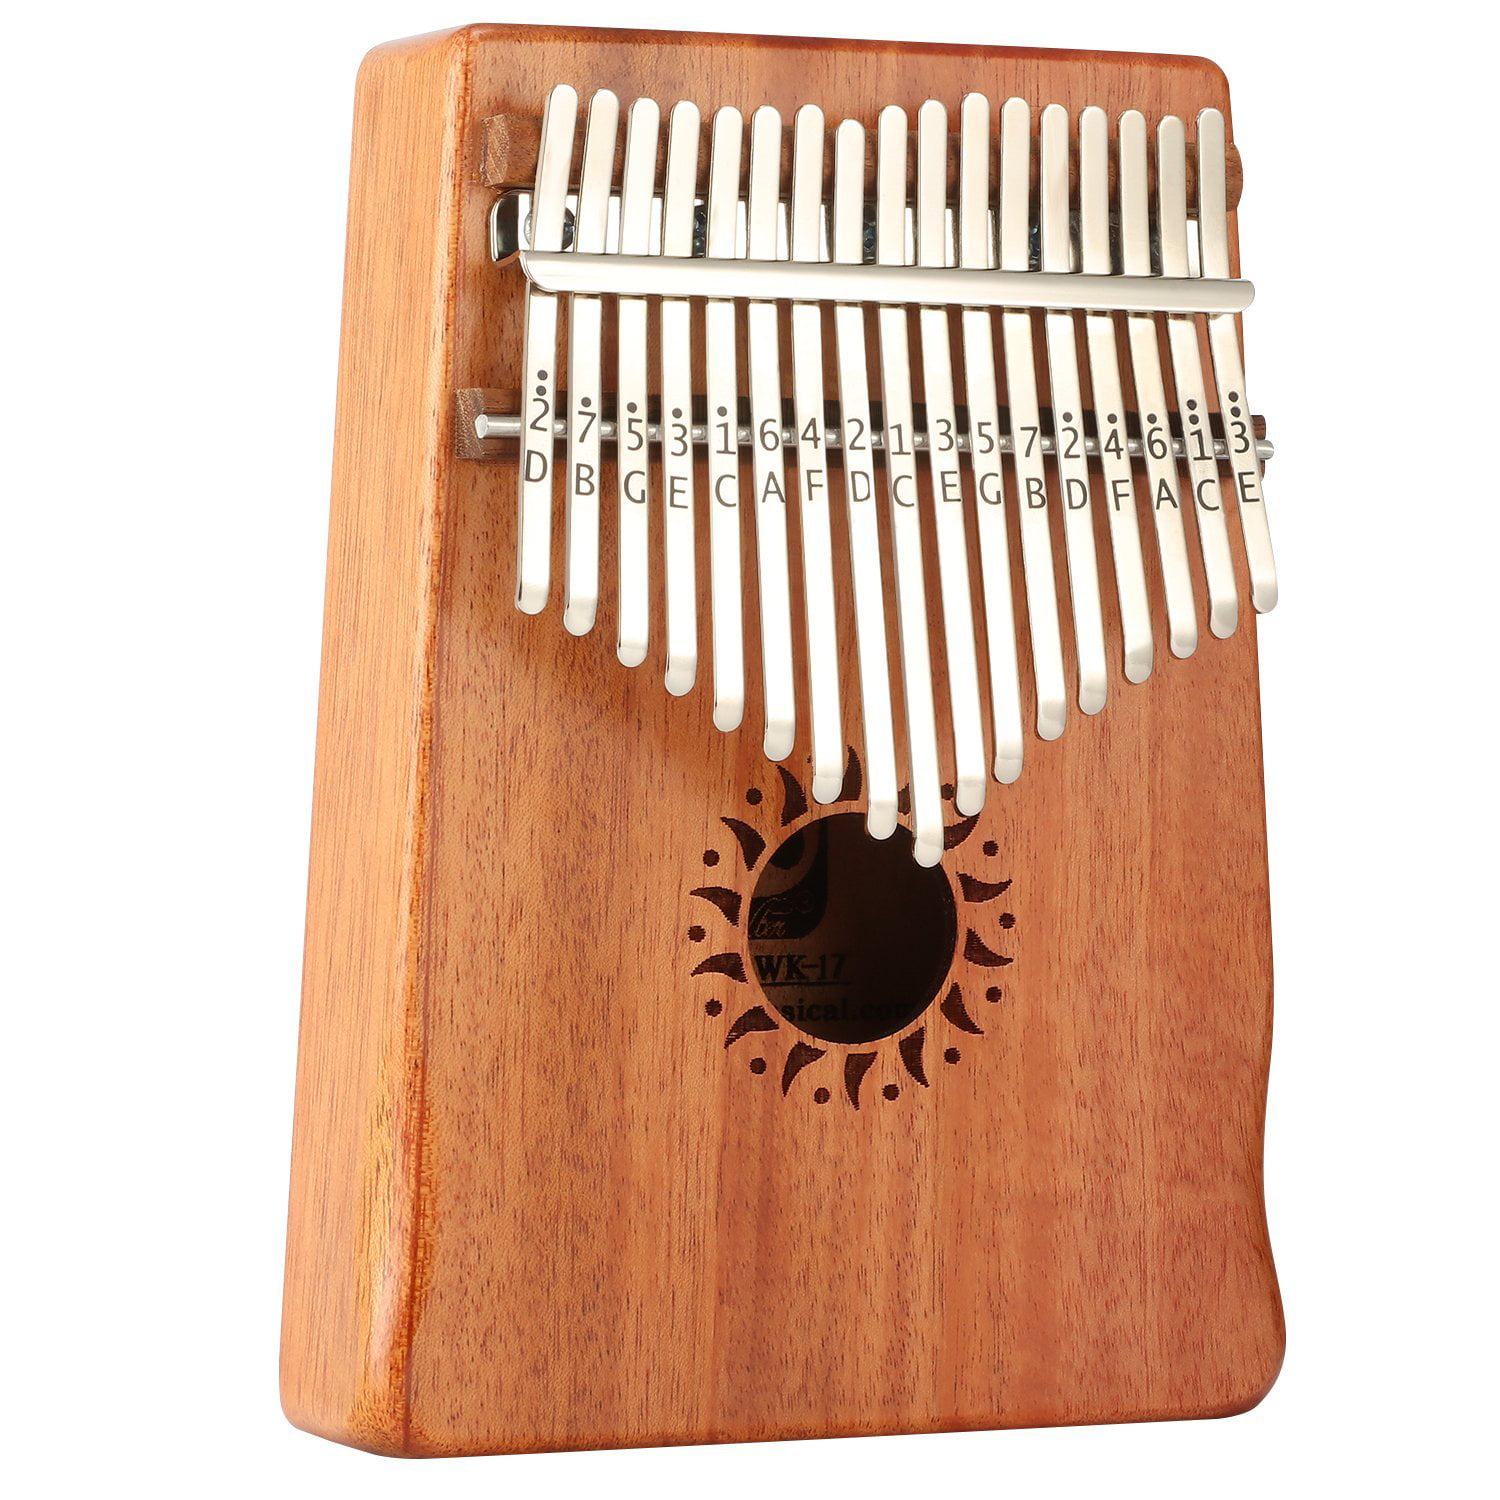 Unique Gift Birthday Gift Idea for Kids Adult Beginners Premium Rosewood Body Ore Metal Tines Finger Piano Mbira 17 Tone Musical instrument Full Size Kalimba 17 Keys Thumb Piano 